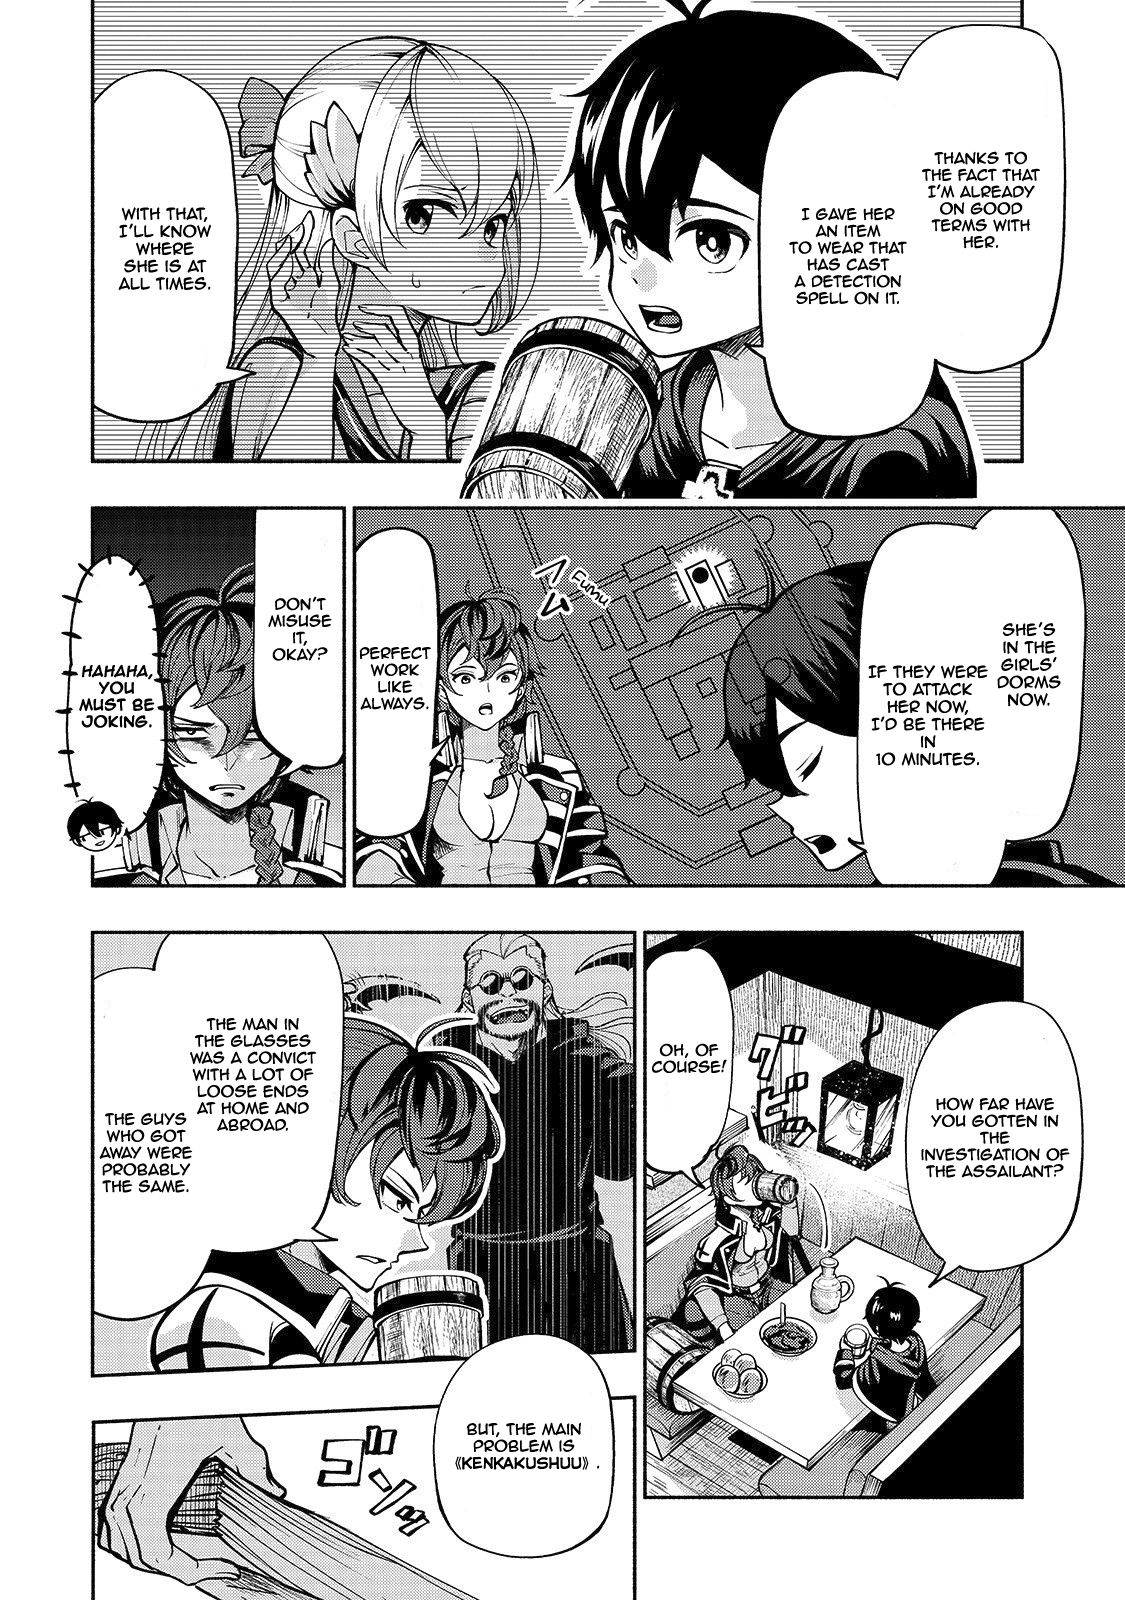 The Reincarnated 「Saint Sword」 Wants to Take it Easy - chapter 4 - #4